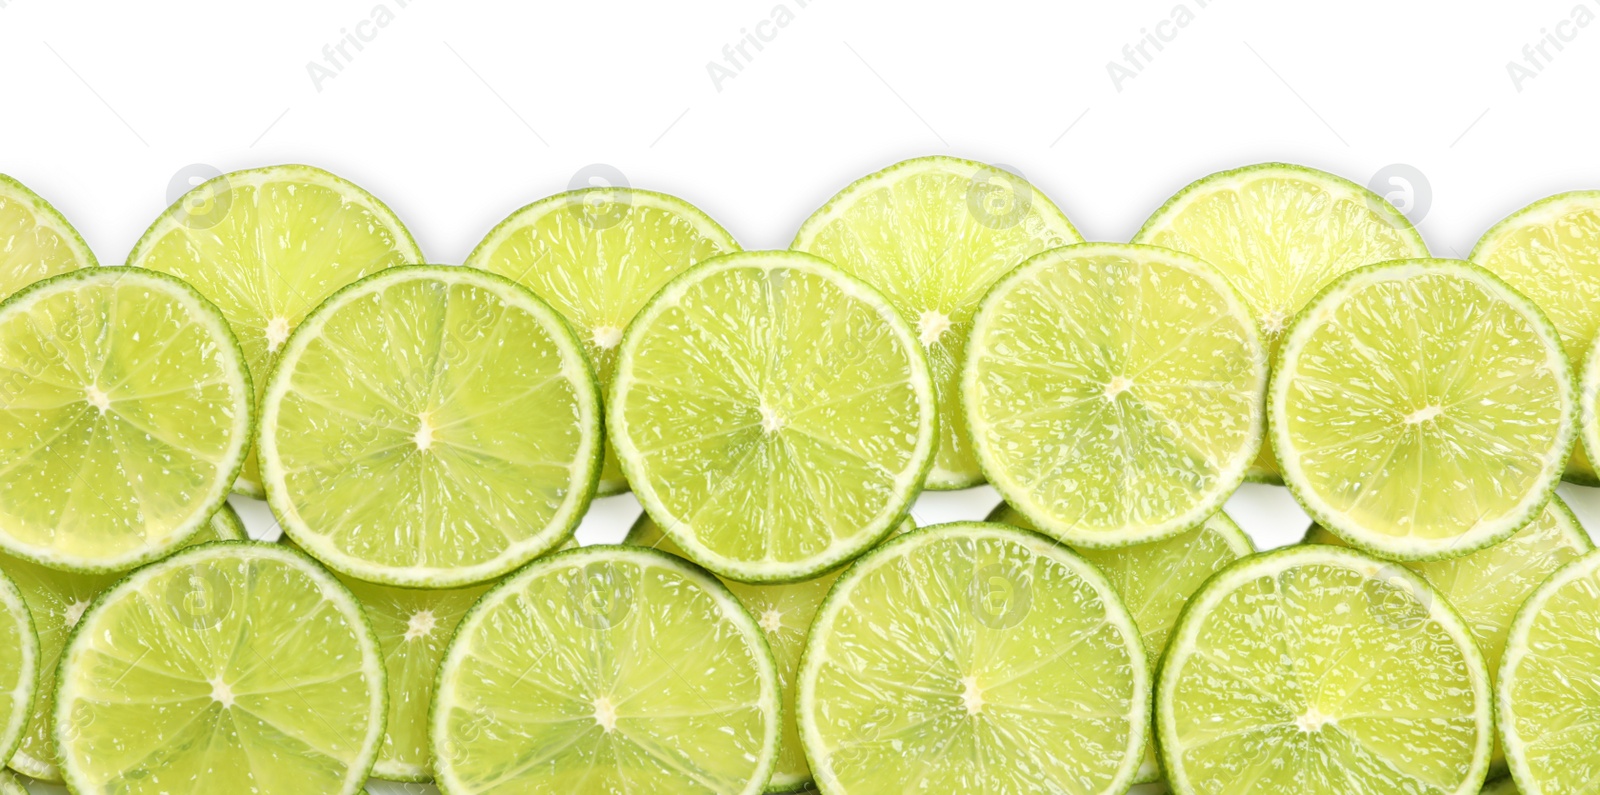 Photo of Fresh sliced ripe limes on white background, top view